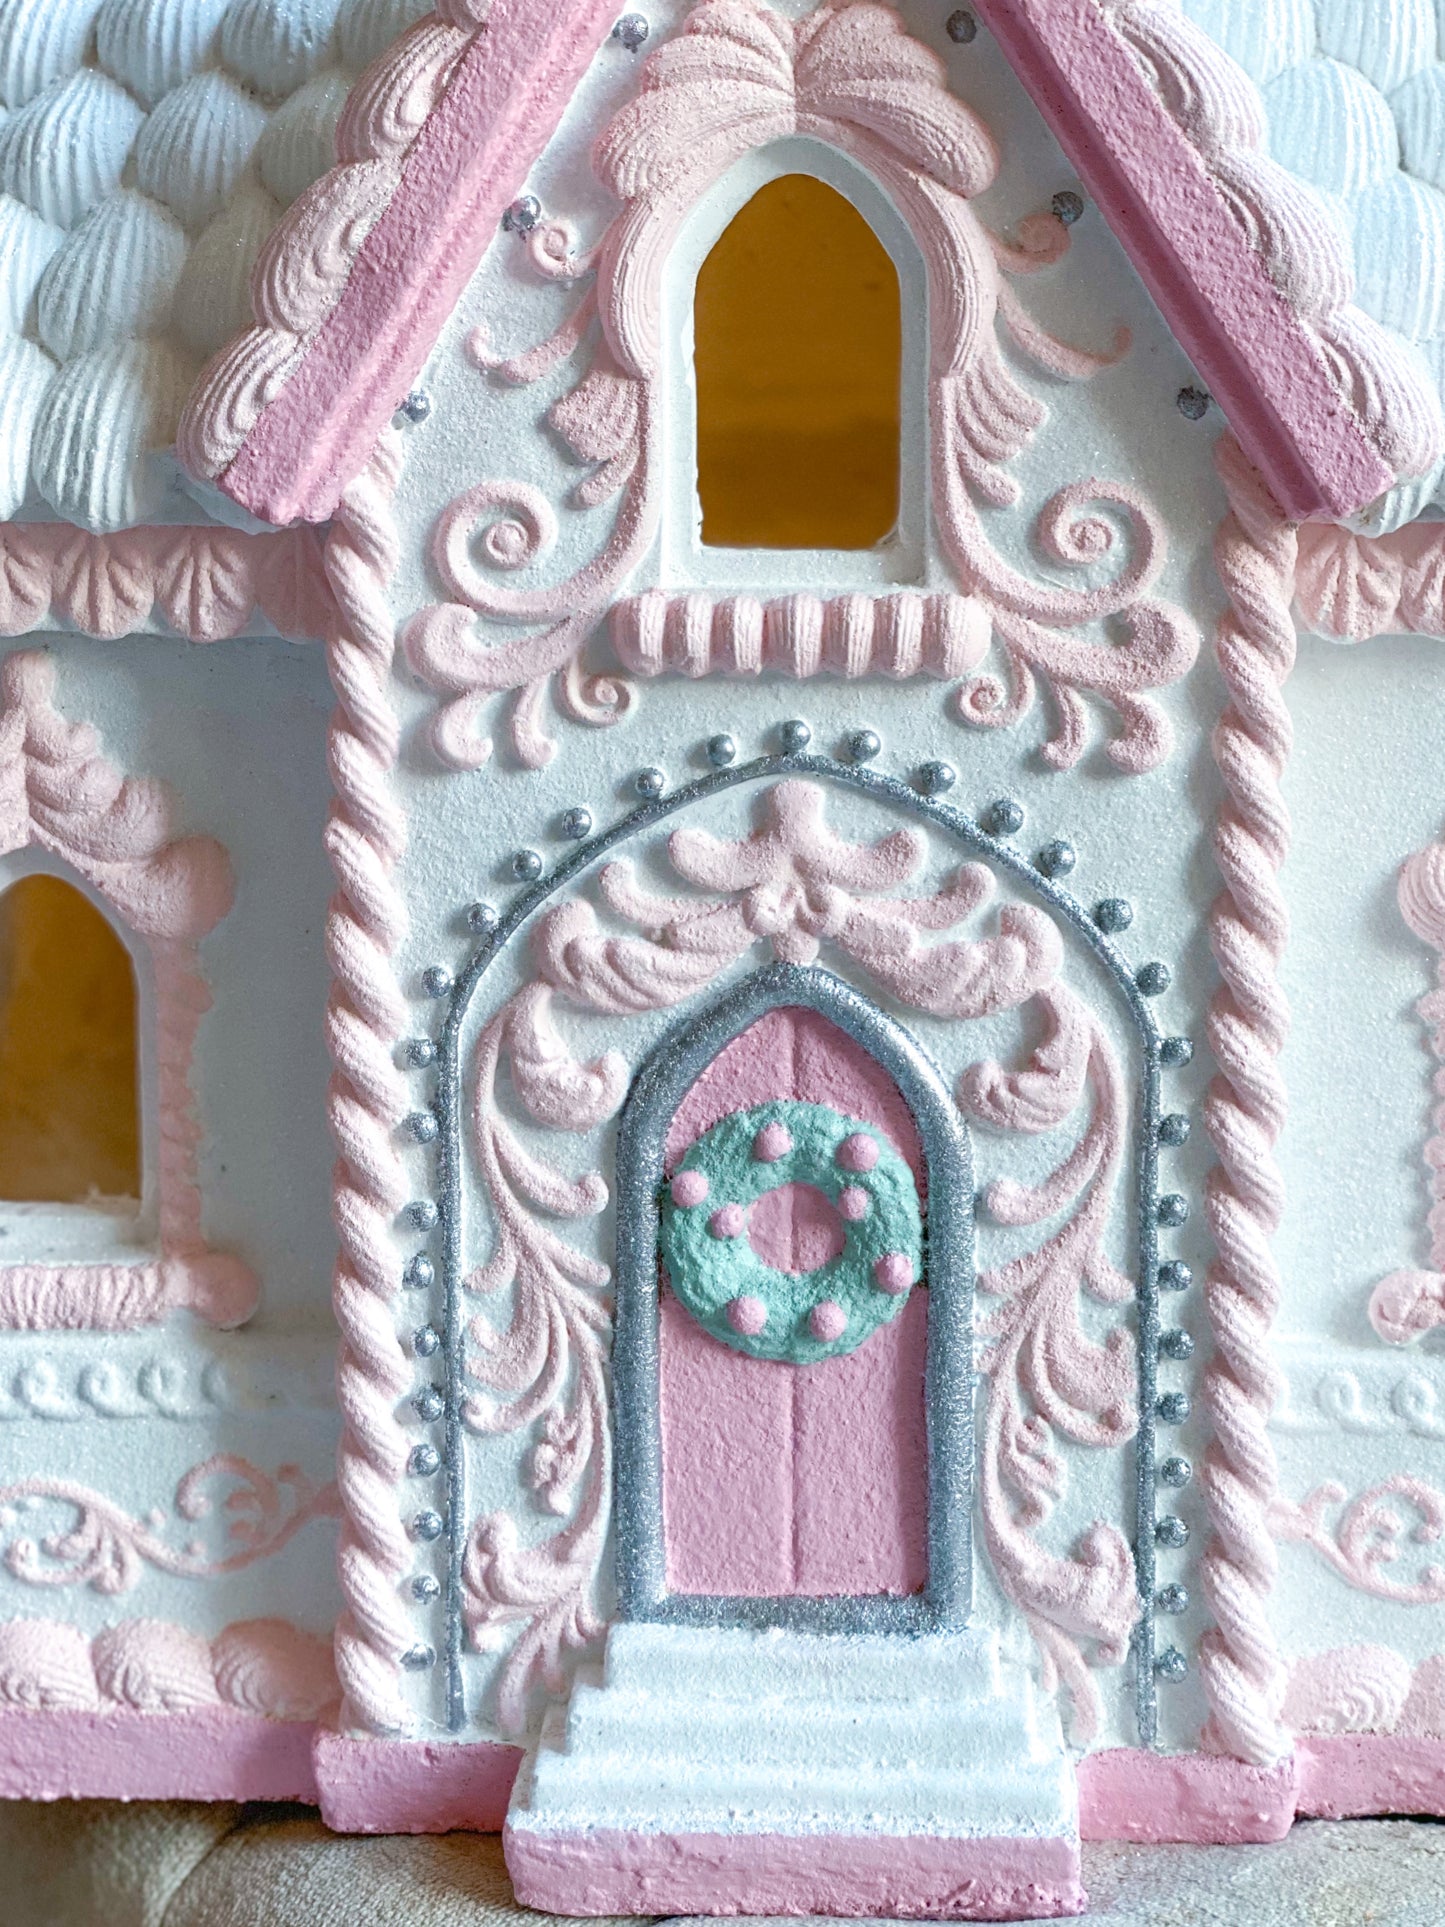 Bespoke Pink and White Hand Painted Large LED Light Up Gingerbread Cookie House